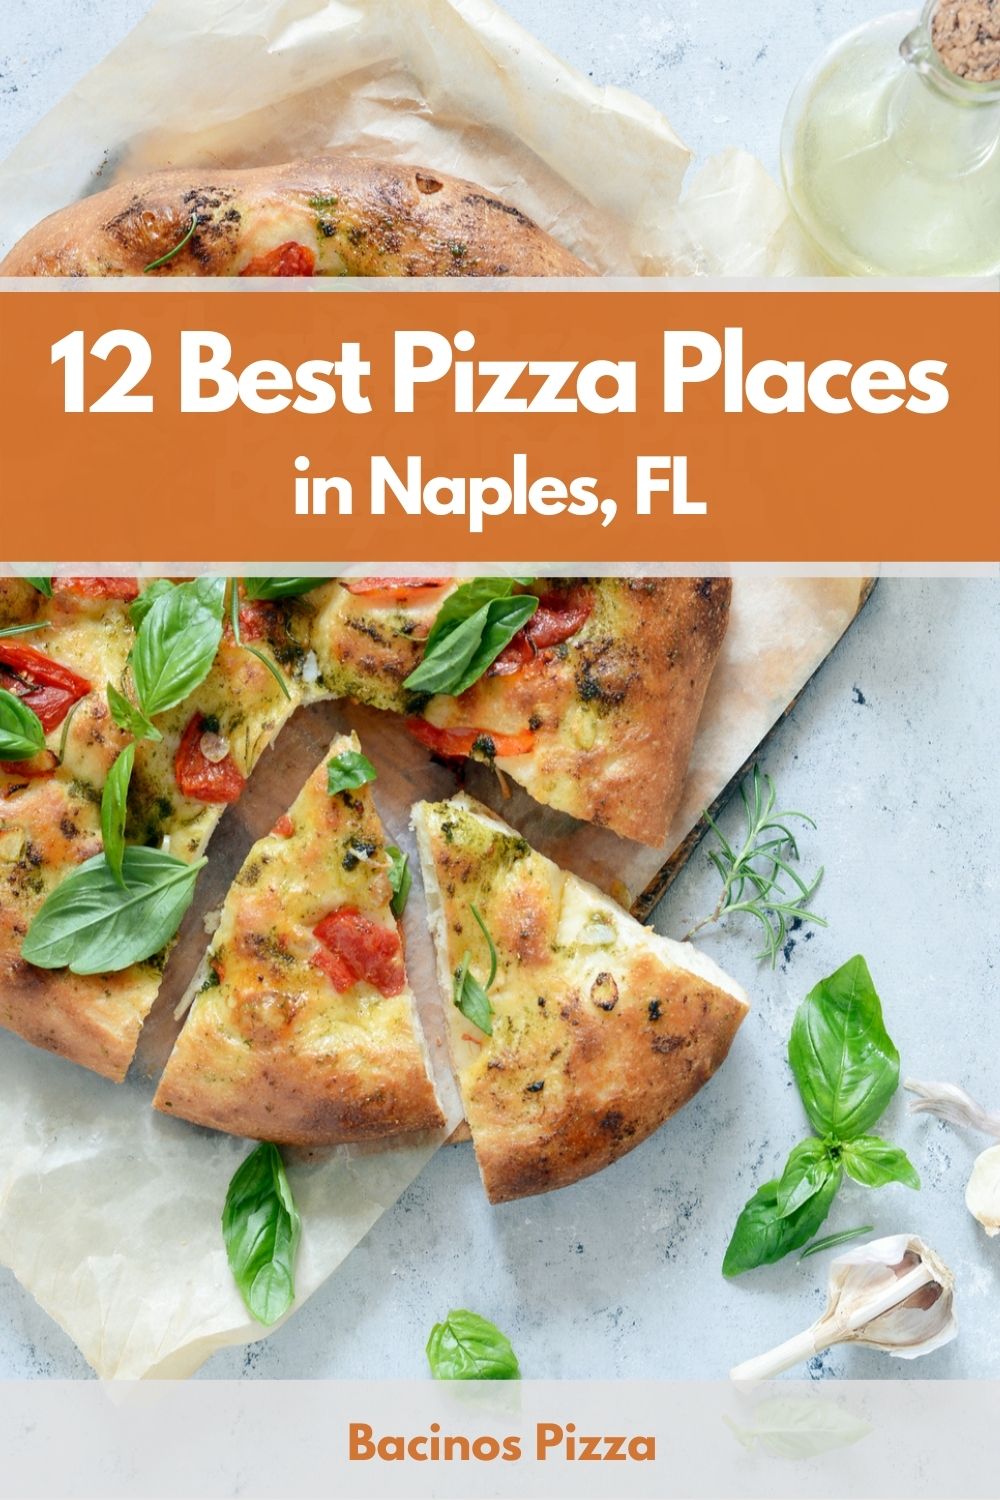 12 Best Pizza Places in Naples, FL pin